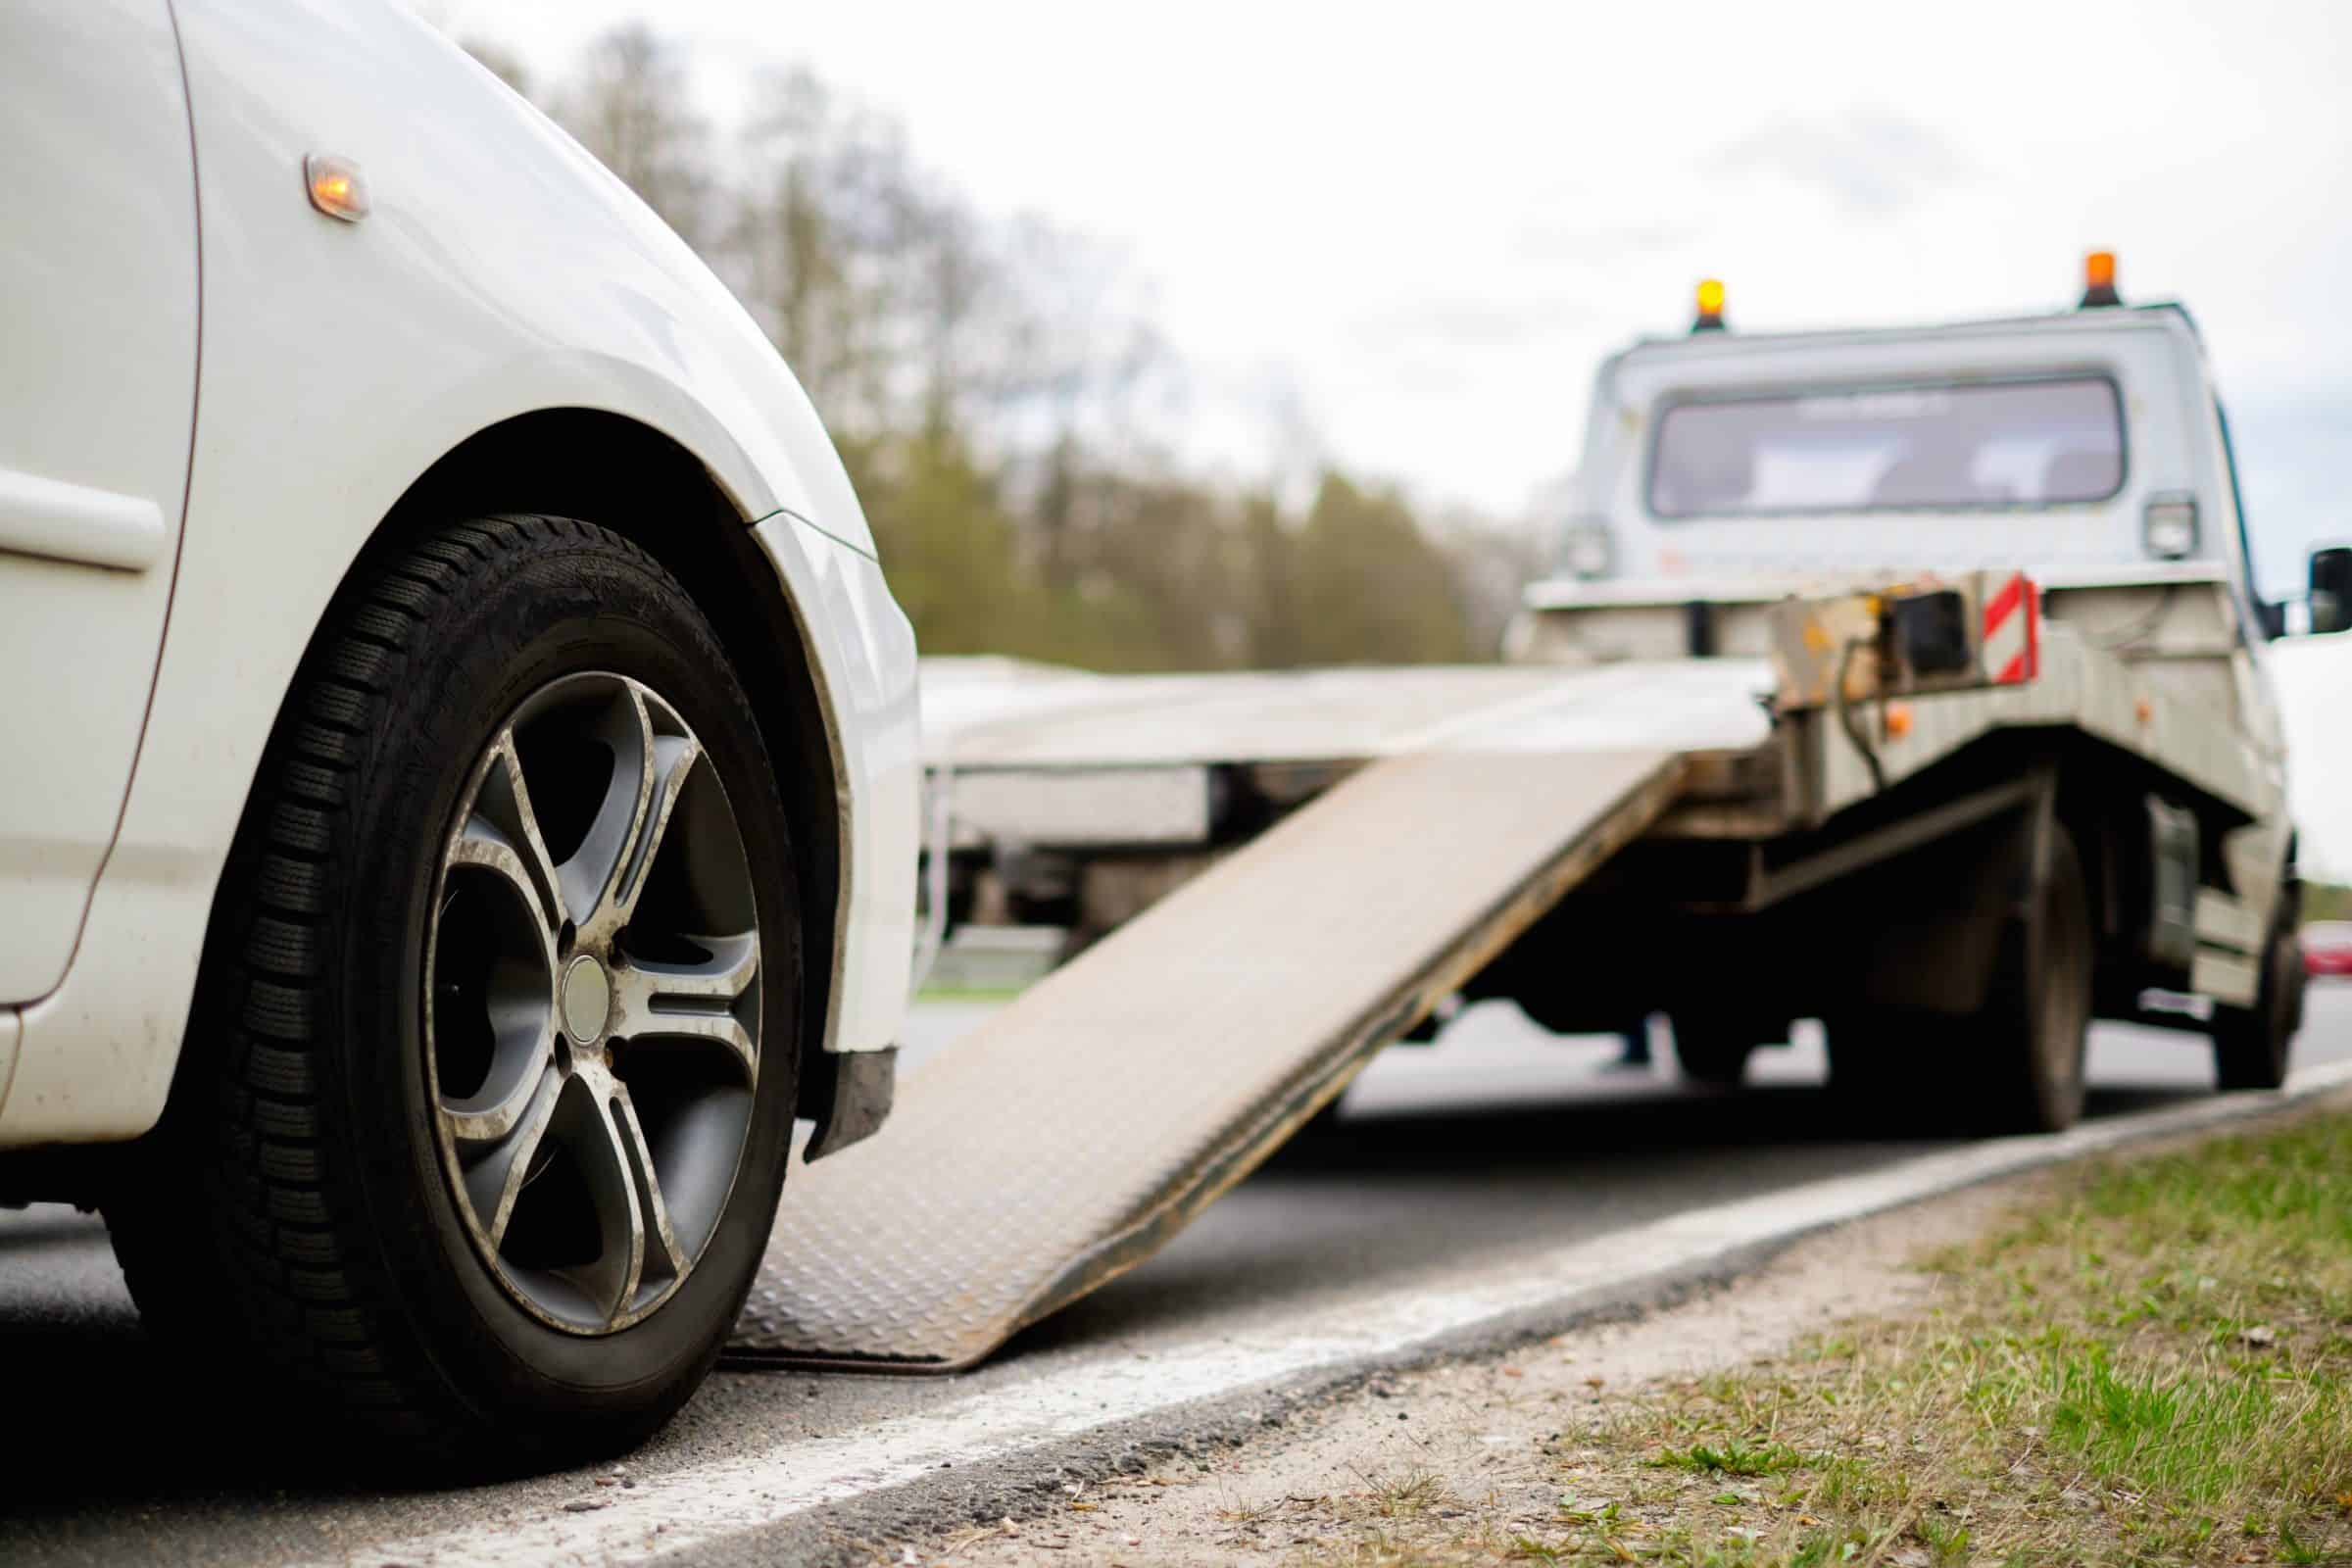 Find The Best Tow Truck & Roadside Assistance In Orlando, FL Area